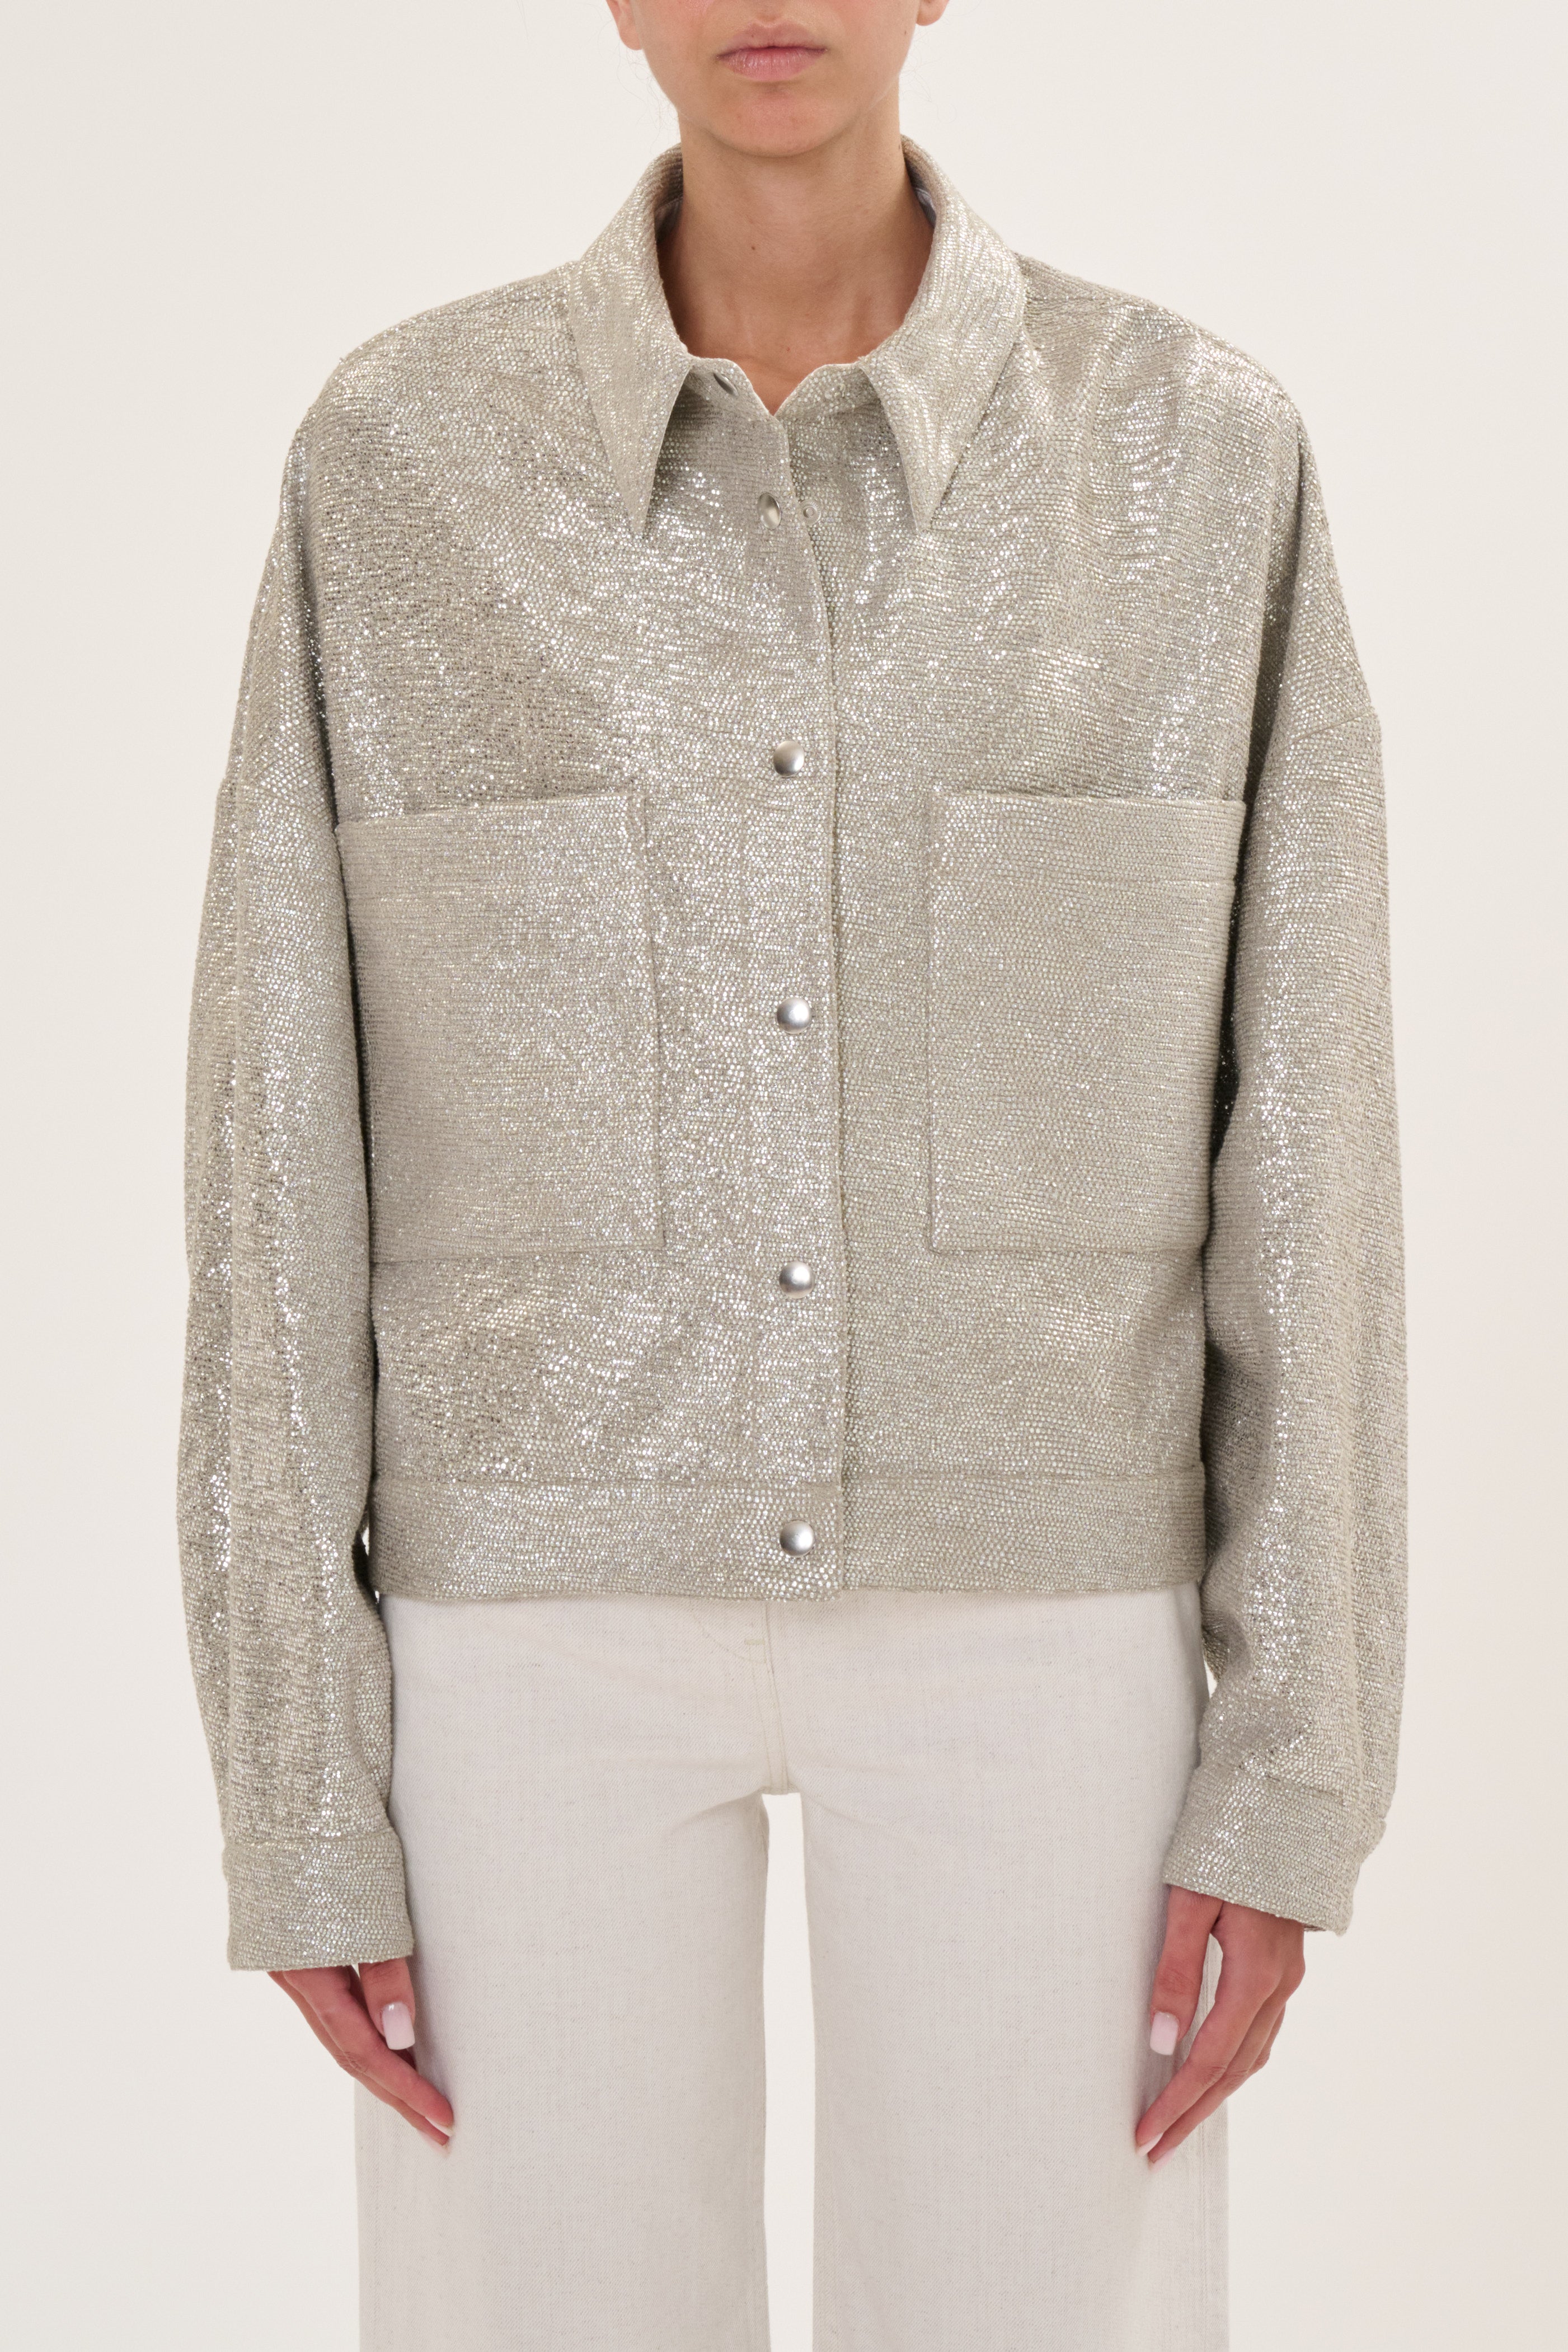 Suzel Jacket in Taupe & Silver